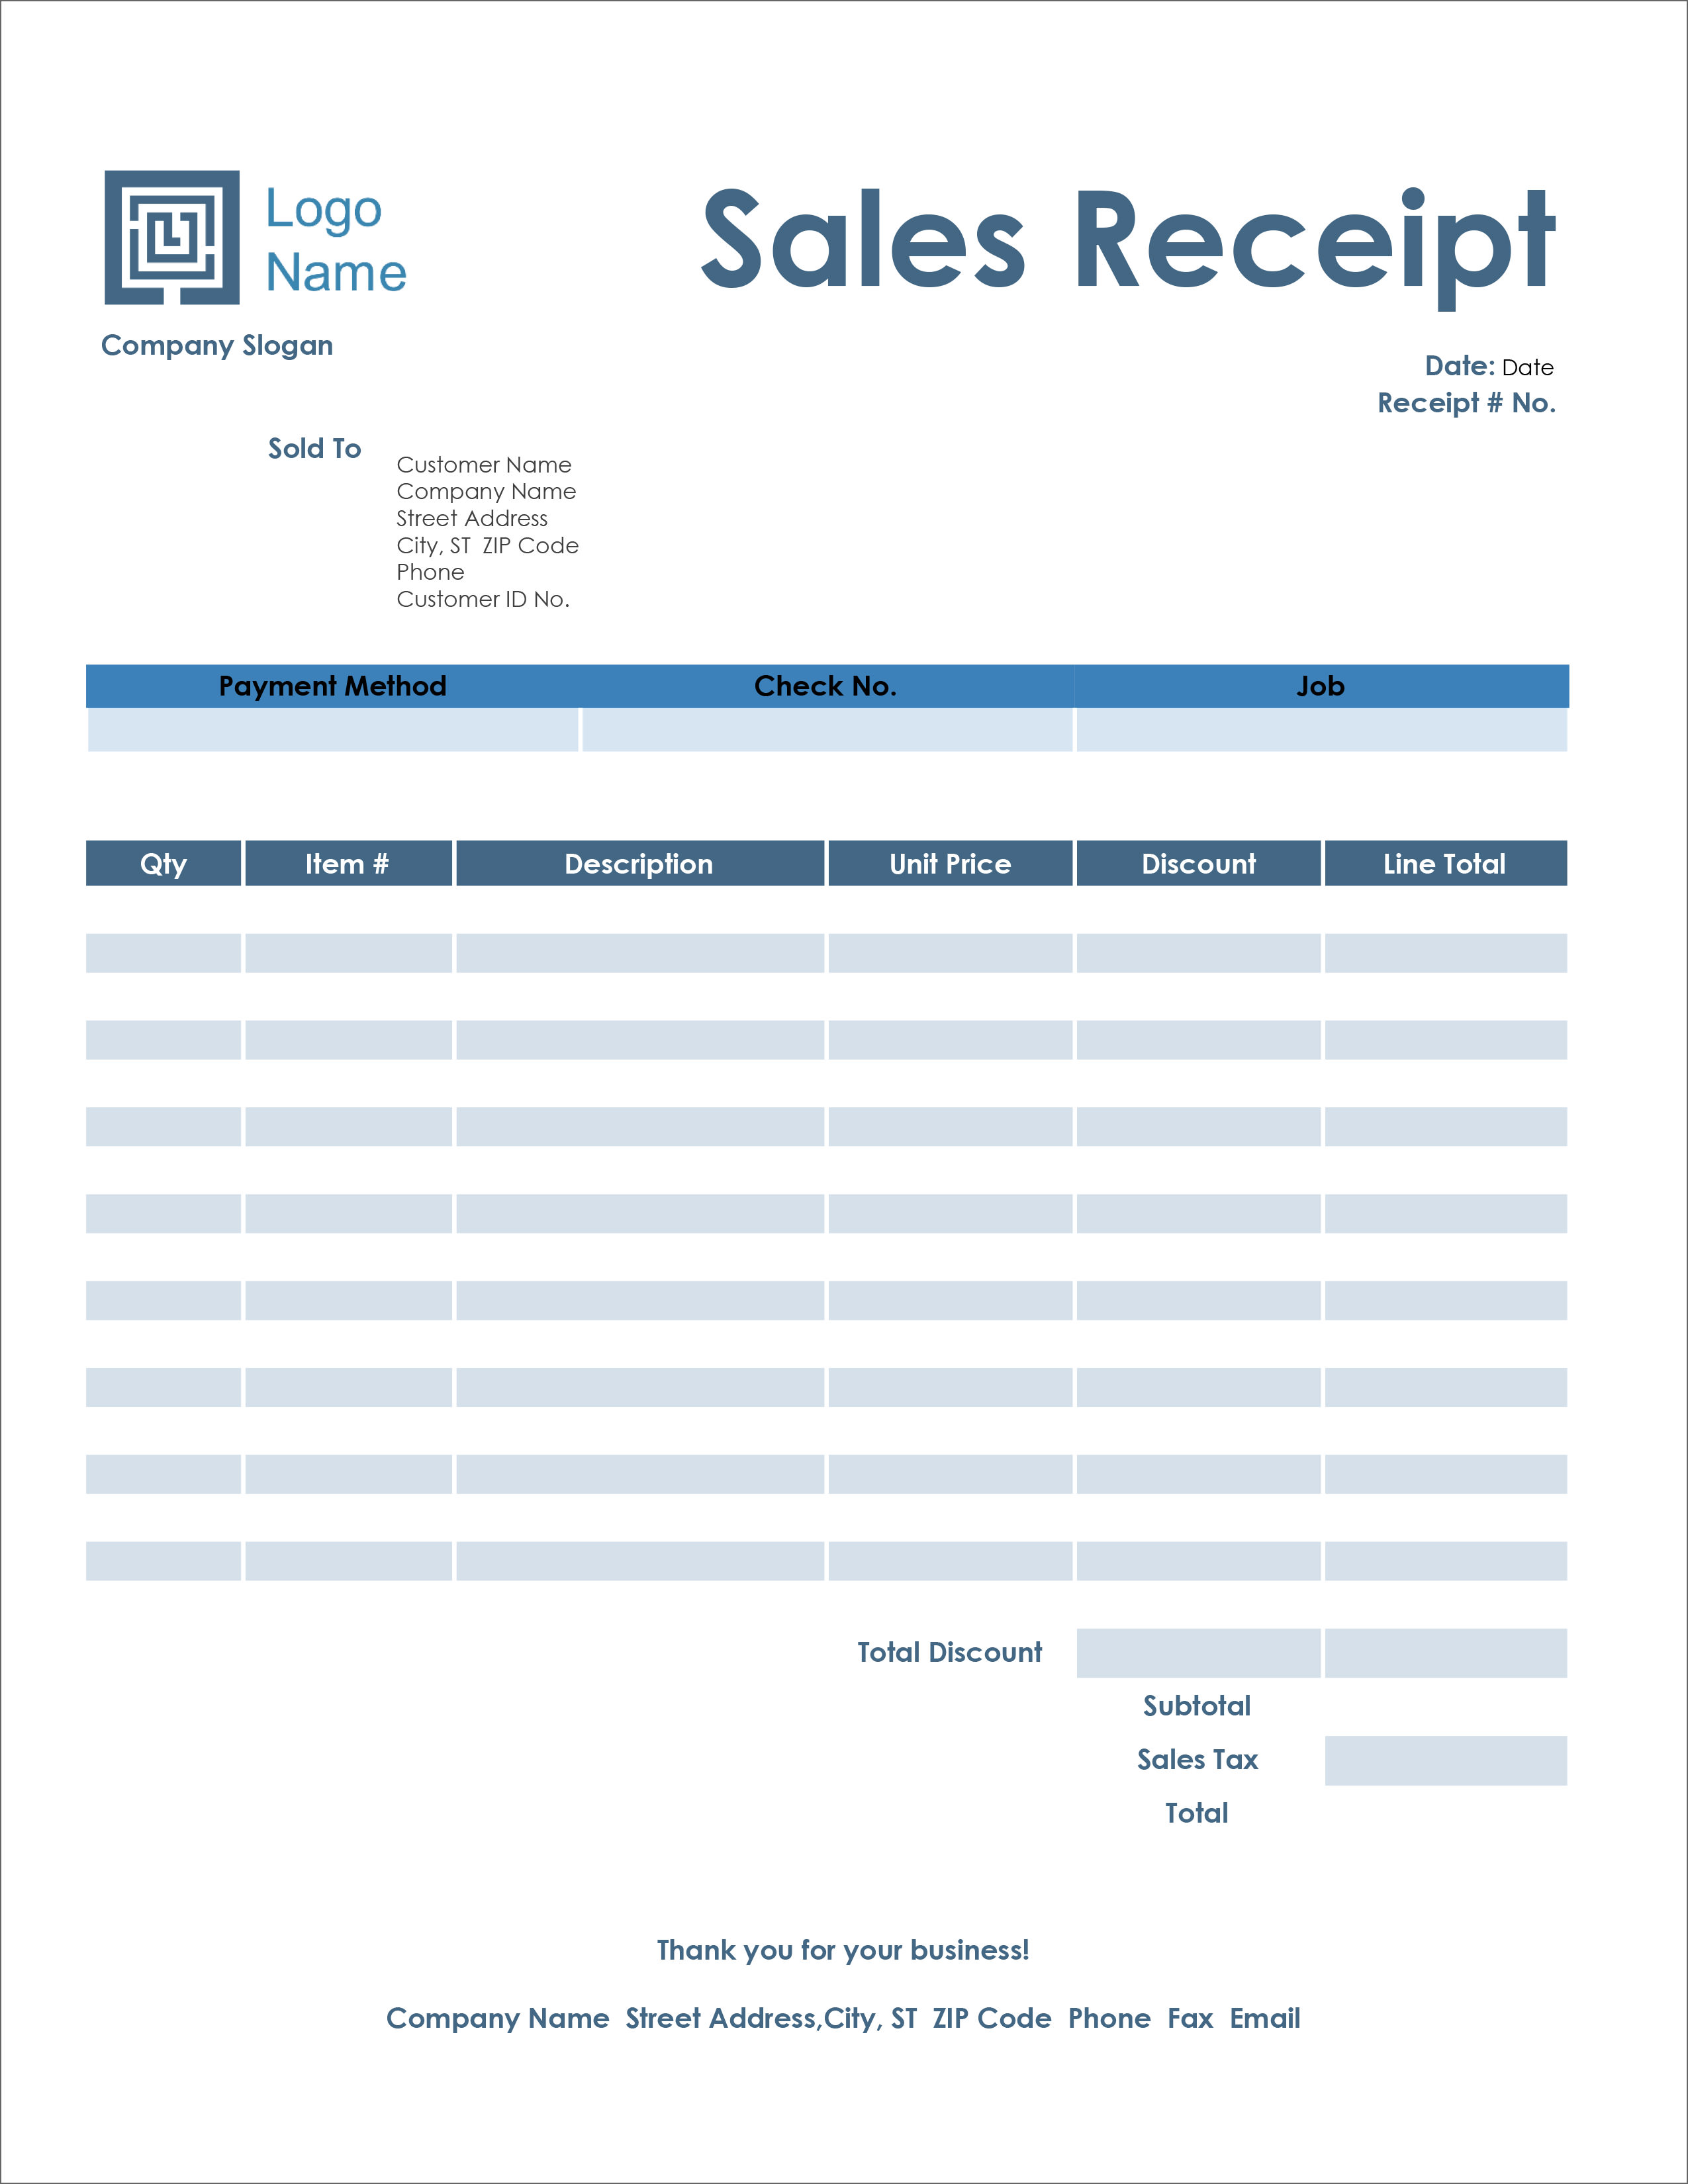 22 Free Receipt Templates - Download For Microsoft Word, Excel Inside Microsoft Office Word Invoice Template